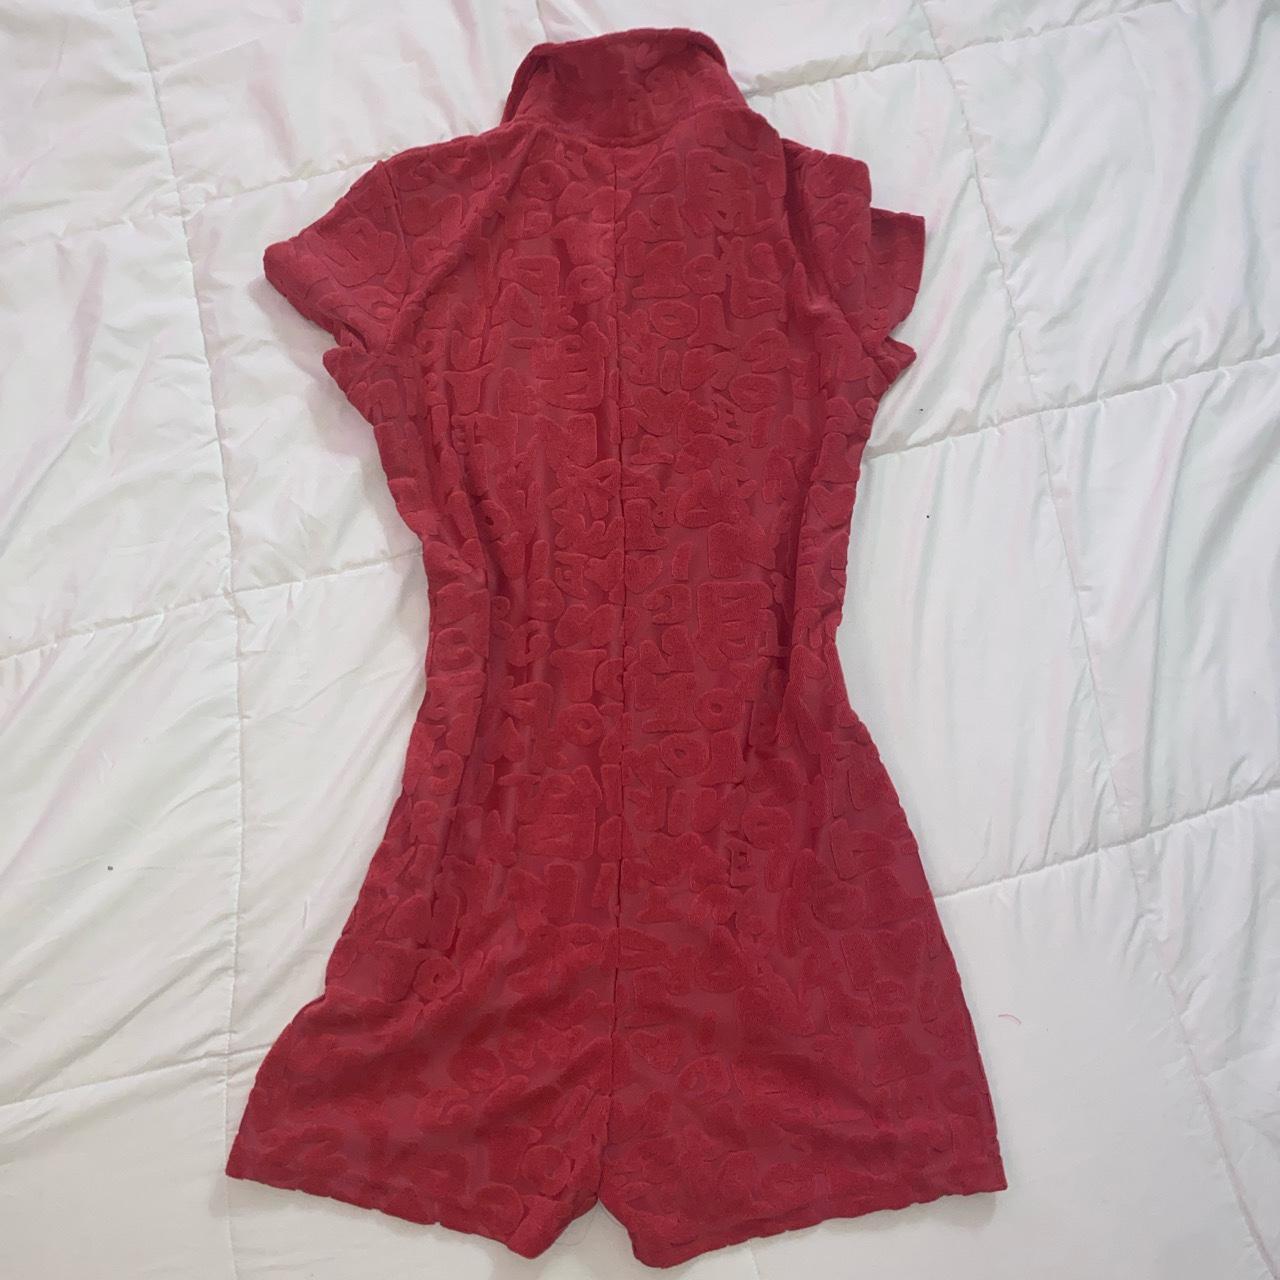 Product Image 2 - Pink dupe jaded London romper!